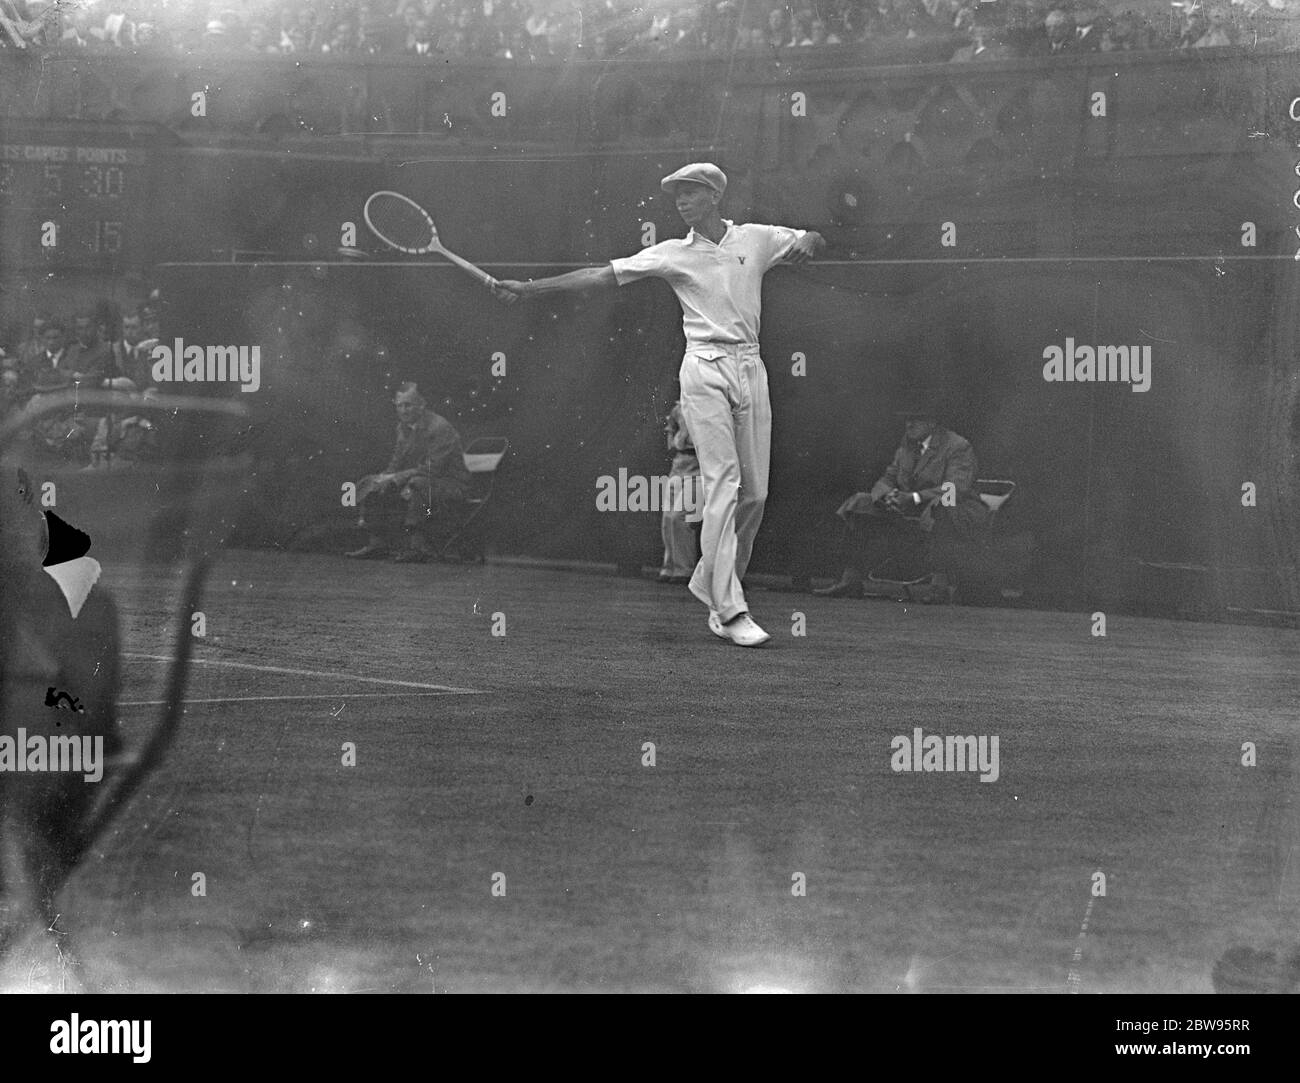 Vines defeats Crawford in men 's semi finals at Wimbledon . H E Vines of America defeated J Crawford of Australia 6-2 ; 6-1 ; 6-3 ; in the semi finals of the men 's singles in the Wimbledon tennis championships . Vines in play during the match . 30 June 1932 Stock Photo